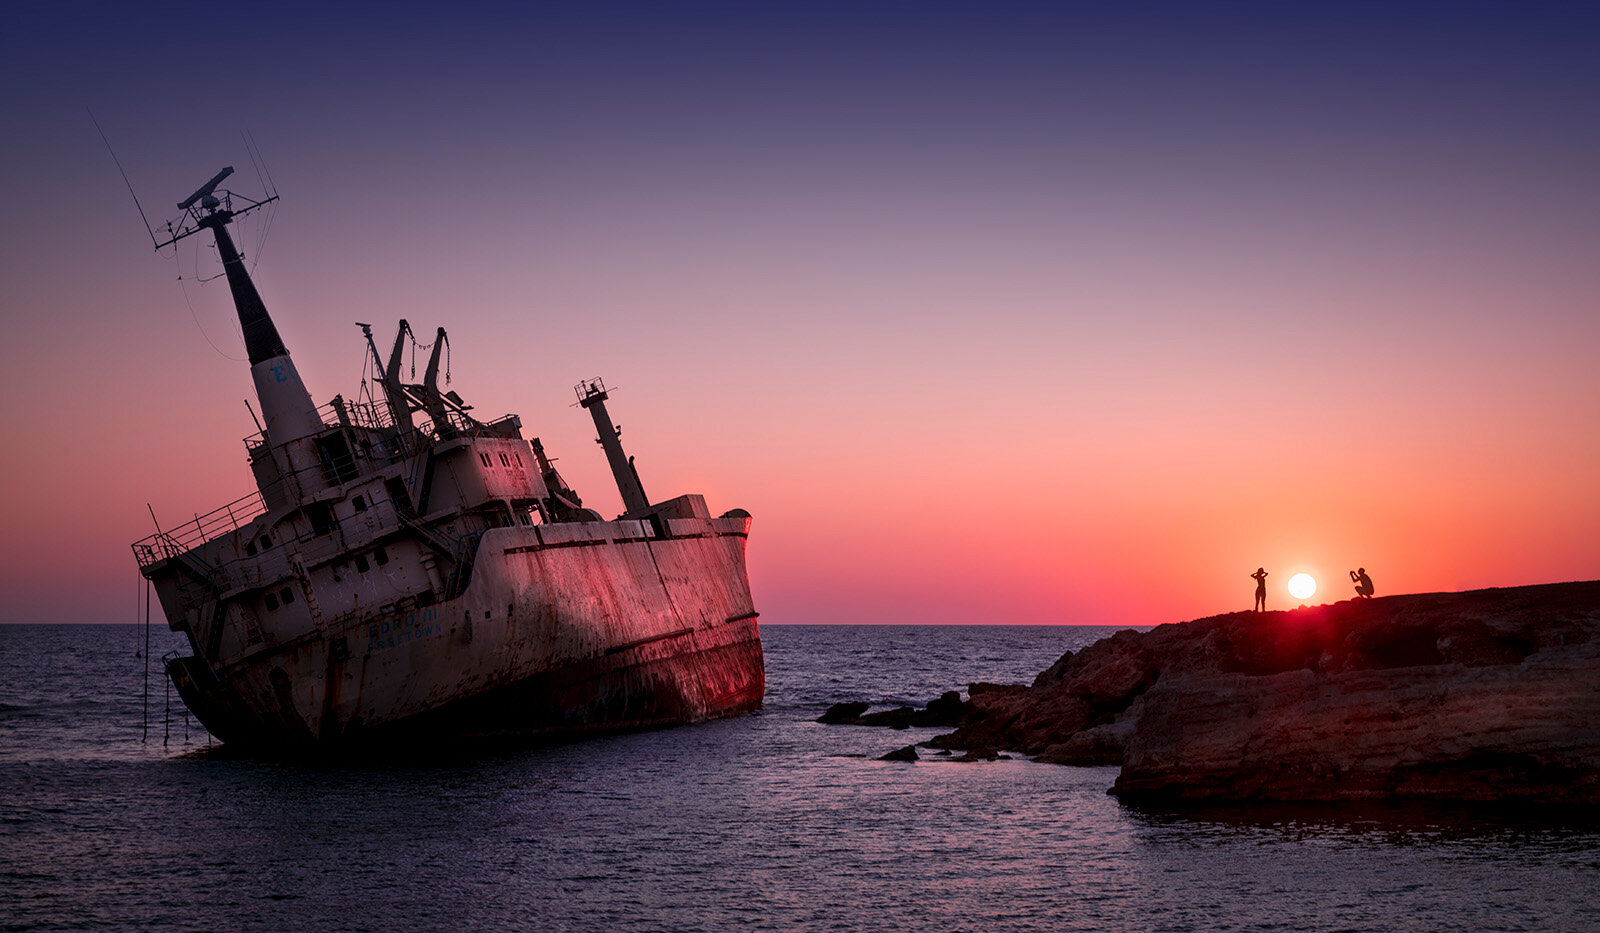 SUNSET AT THE SHIPWRECK - Neil Hall (Current POTY Champion)   (Copy)